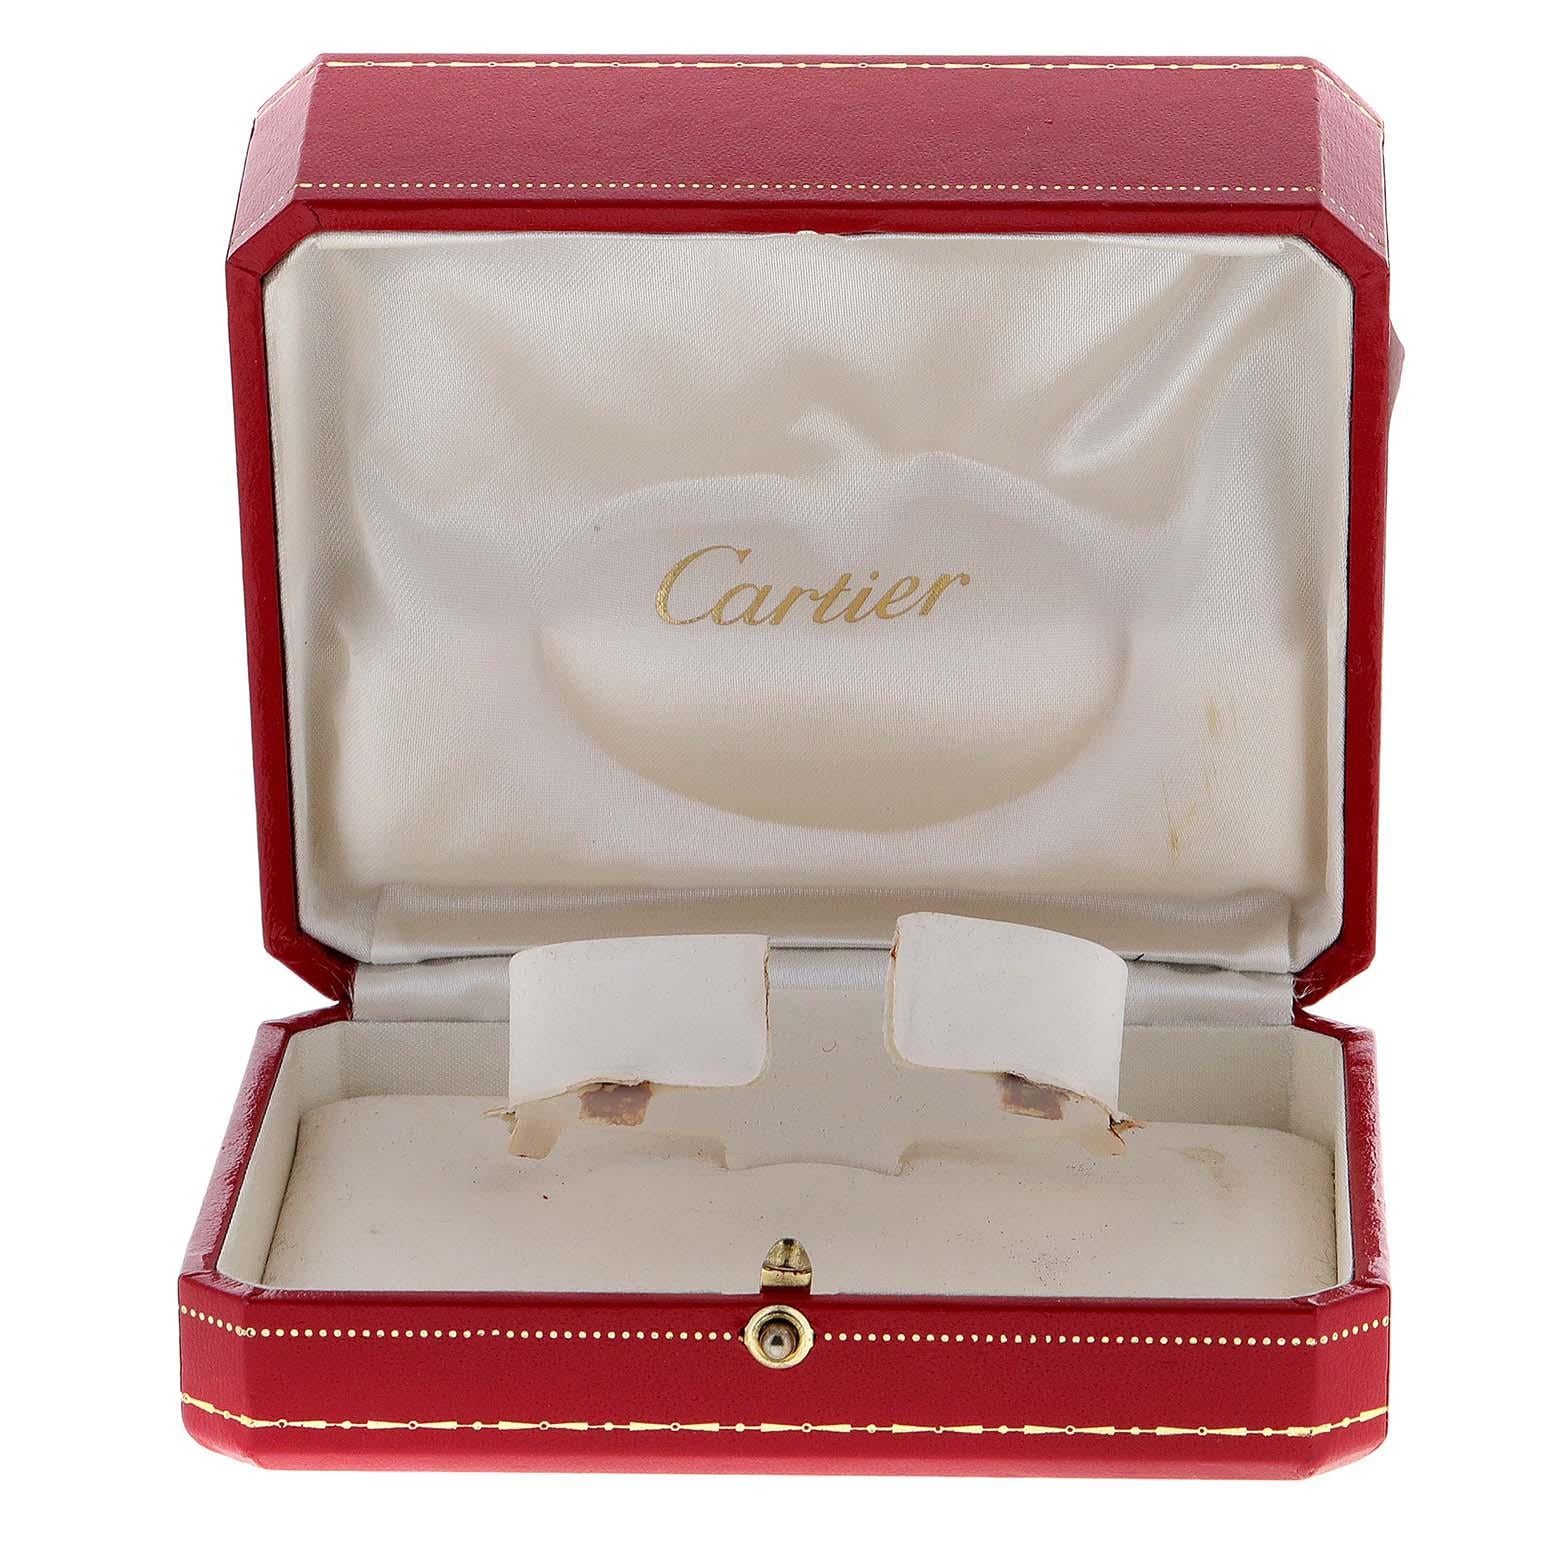 Cartier Panthere Vendome 18K Yellow Gold Ladies Watch 6692 4